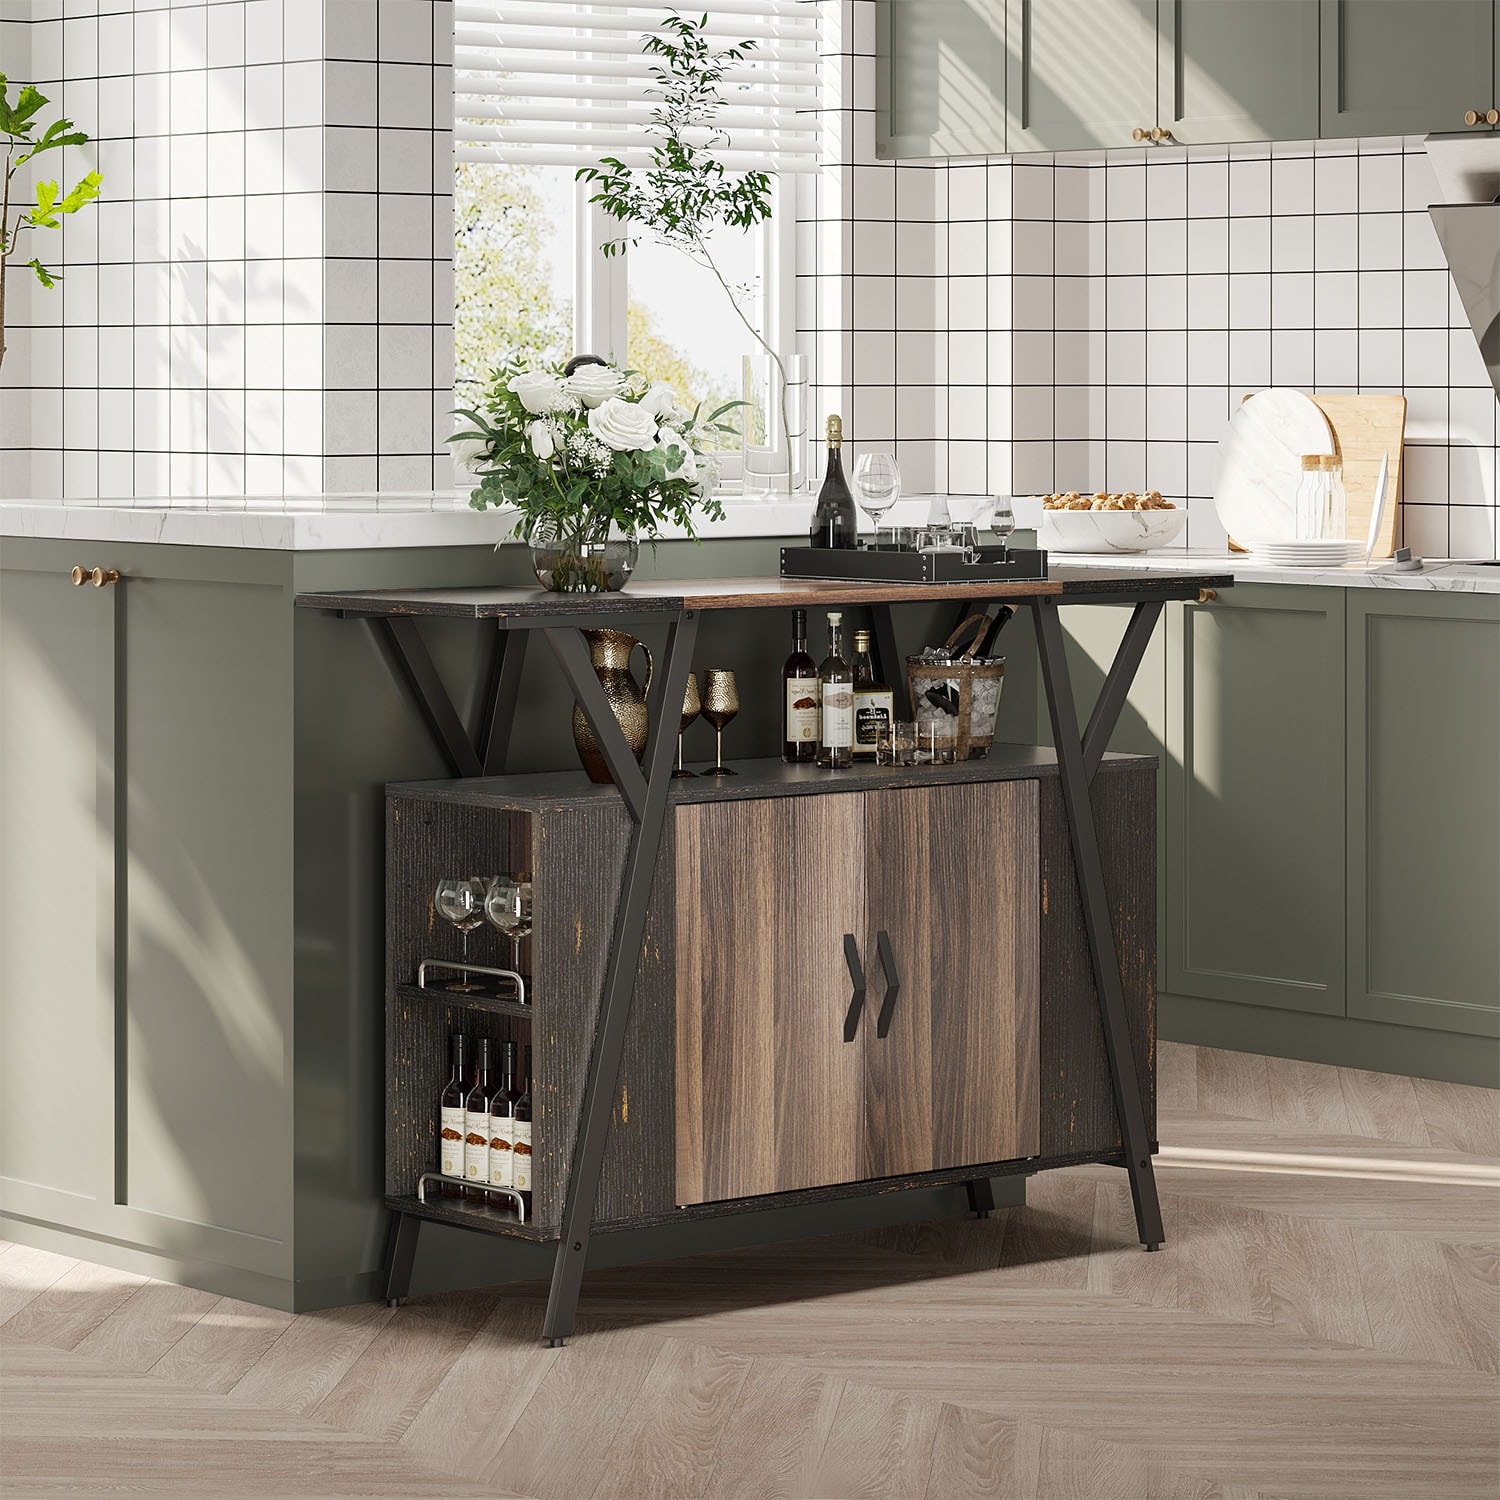 https://ak1.ostkcdn.com/images/products/is/images/direct/b8e95240d471740eb96457b1cbf5e94100ccca1b/Kitchen-Island-Buffet-Console-Table-with-Storage-Cabinet.jpg